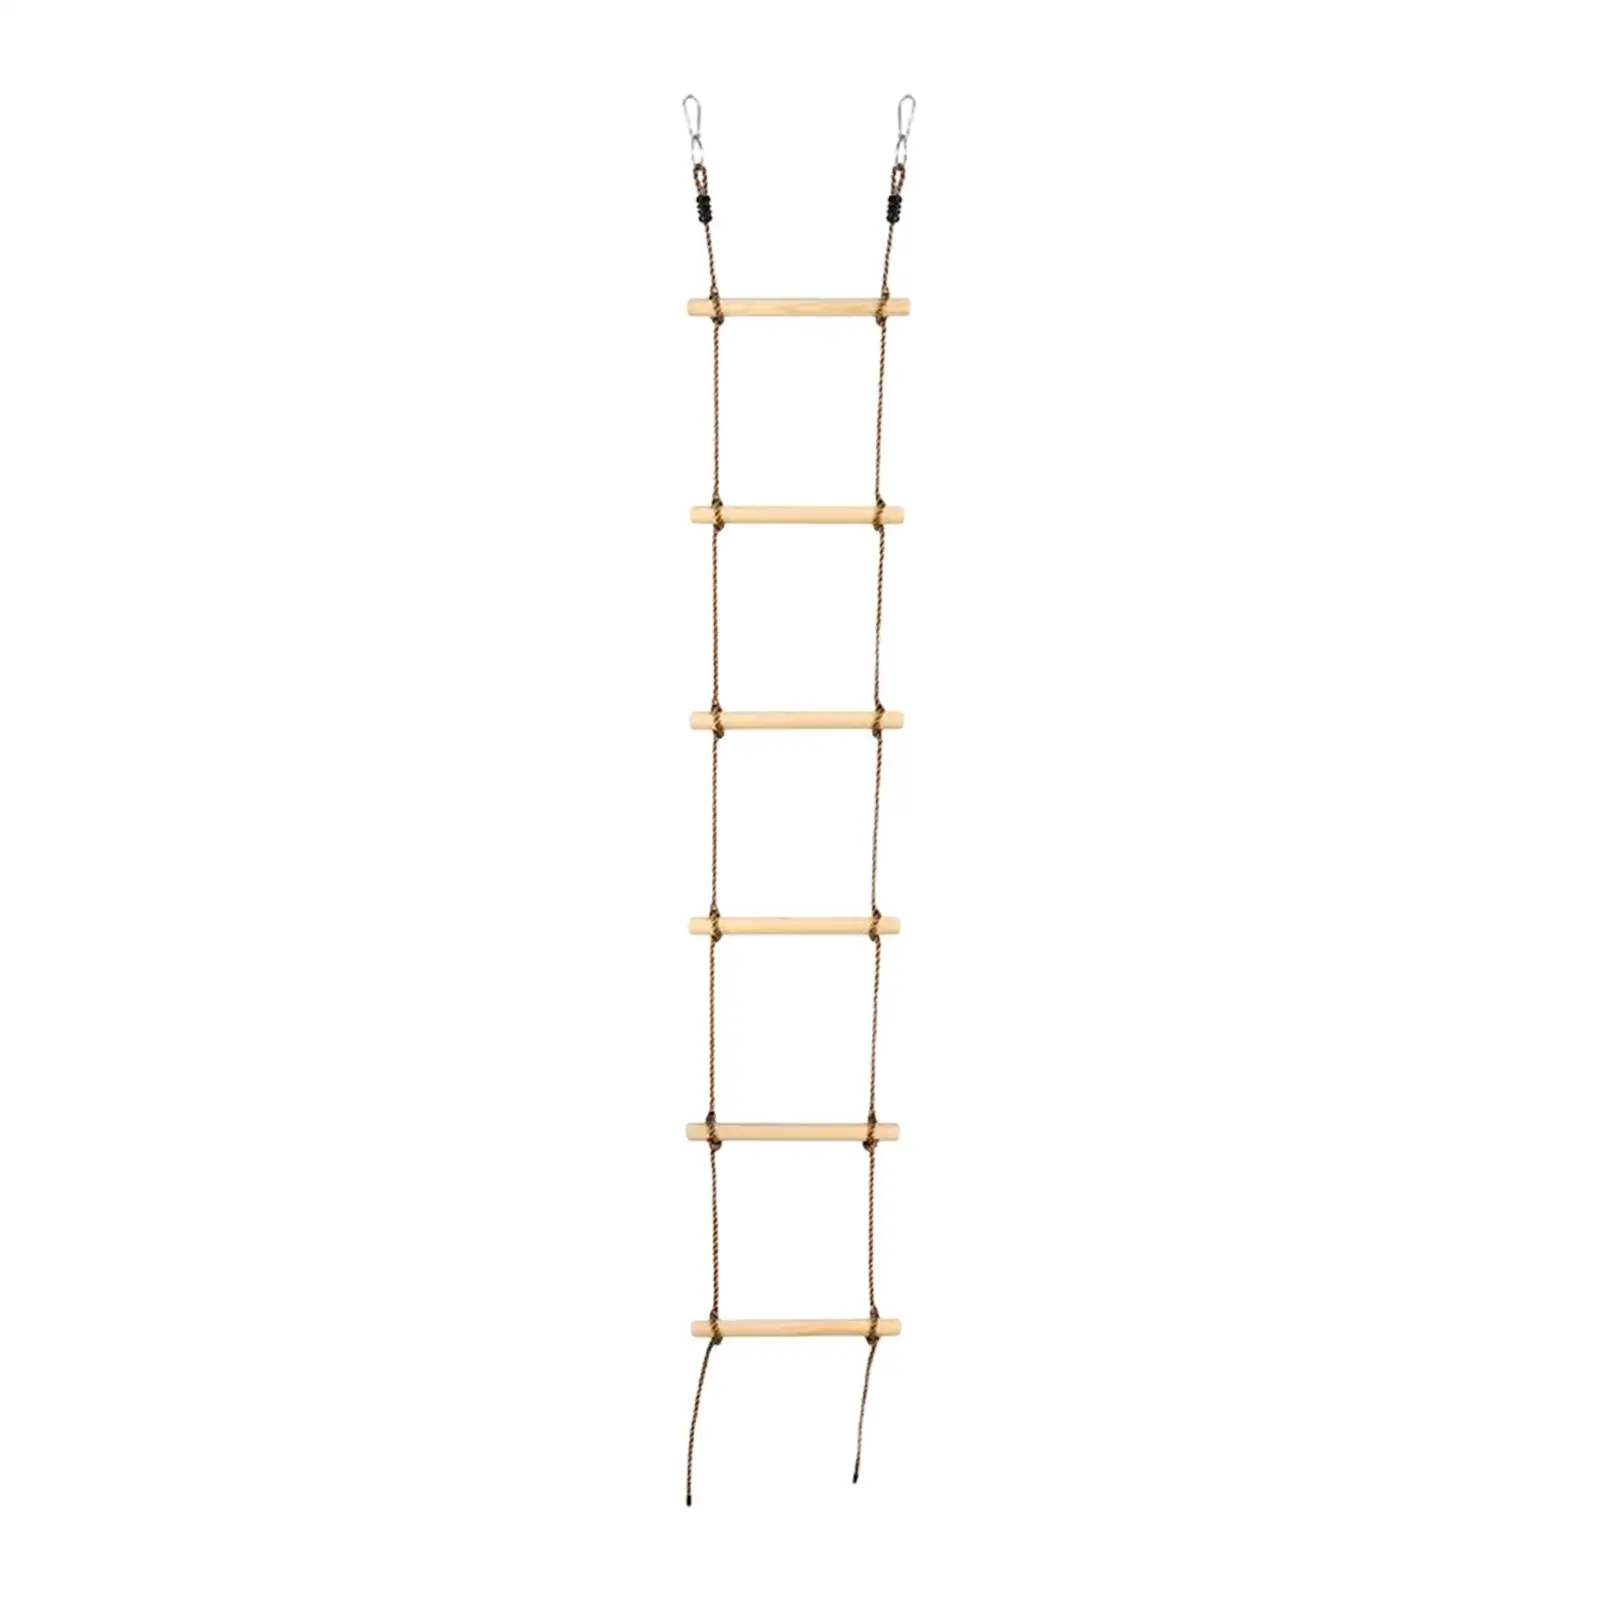 8 ft. Climbing Rope Ladder for Kids, DIY Swingset Addition for Indoor Play